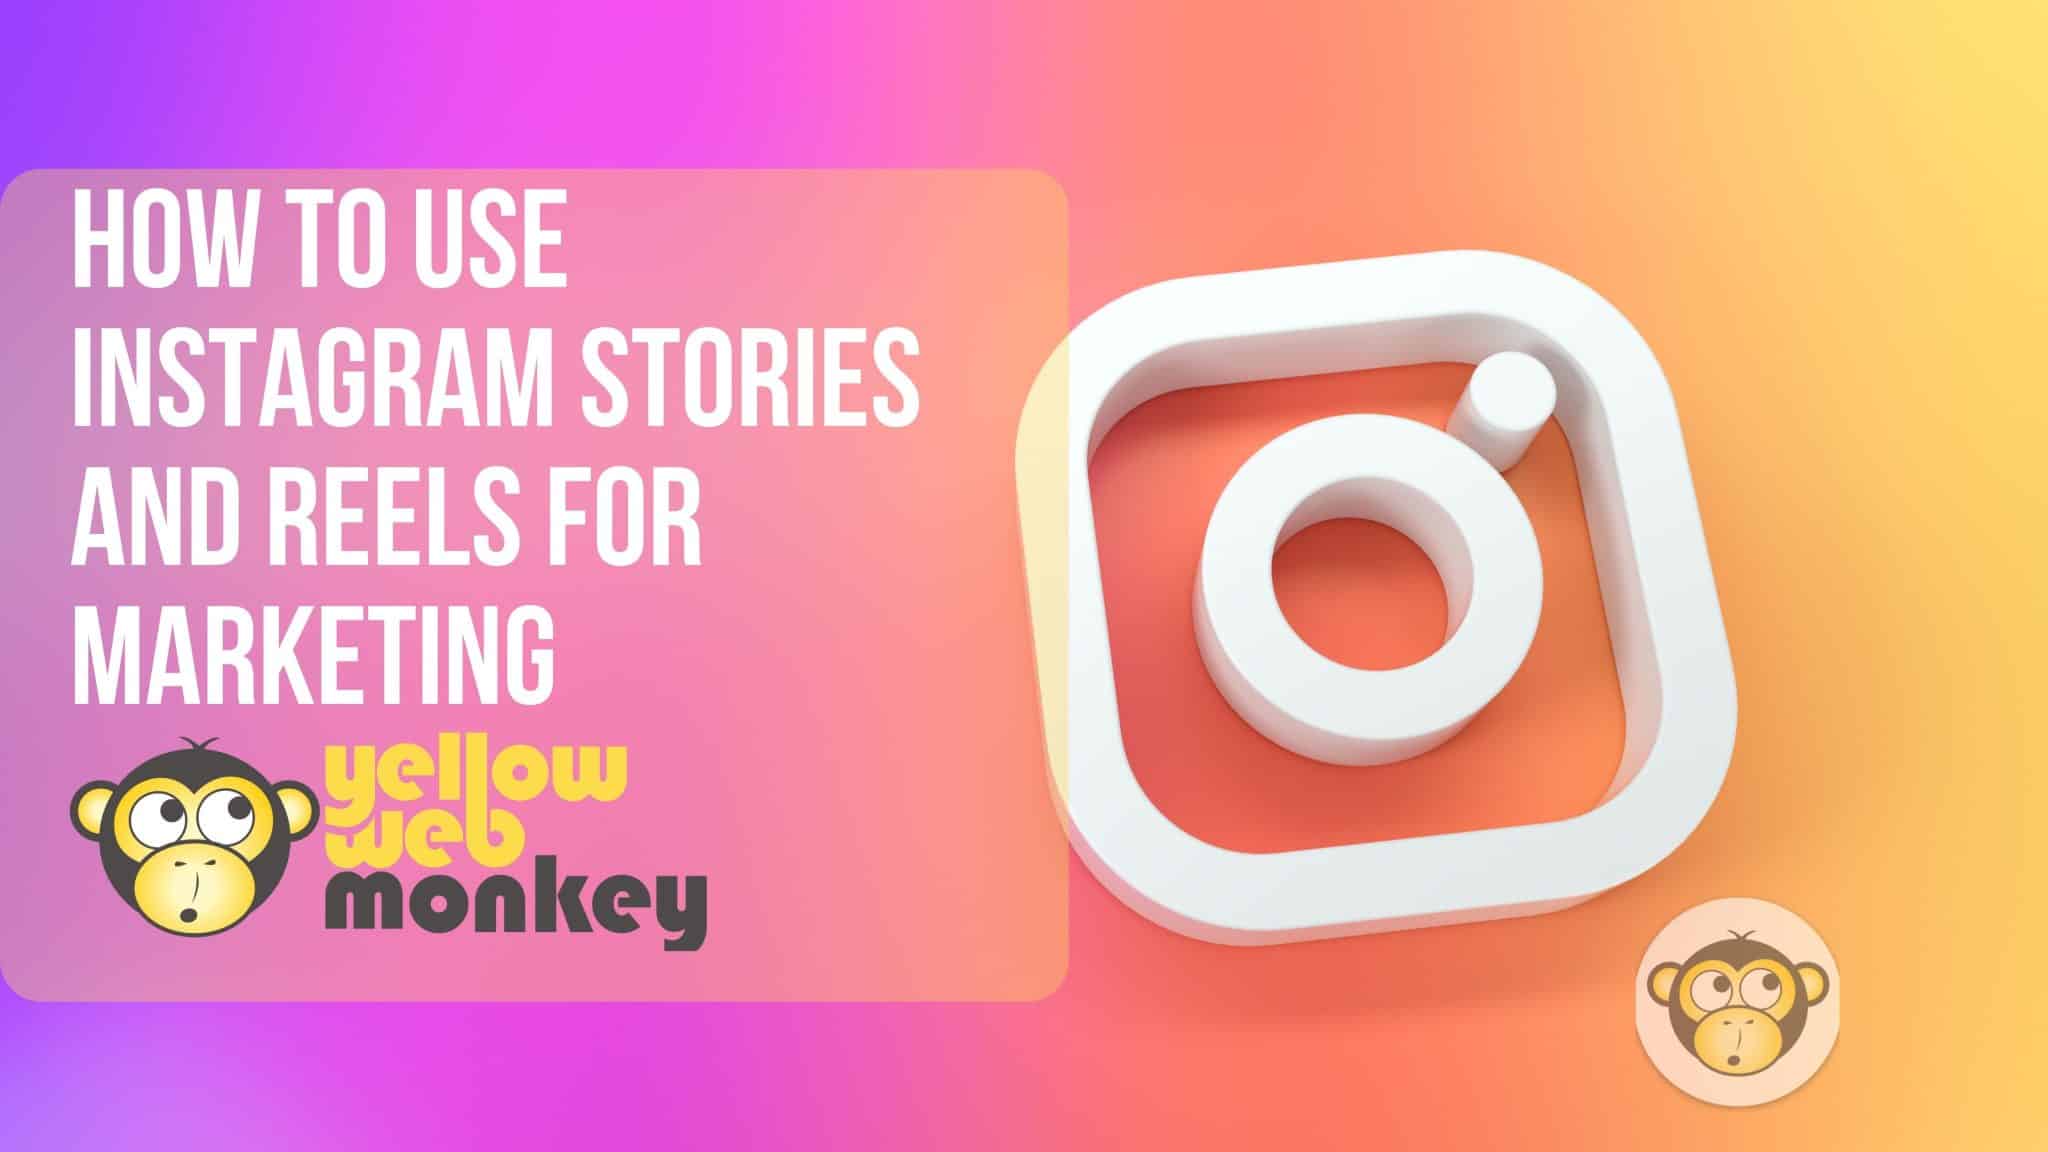 Instagram stories and reels for marketing